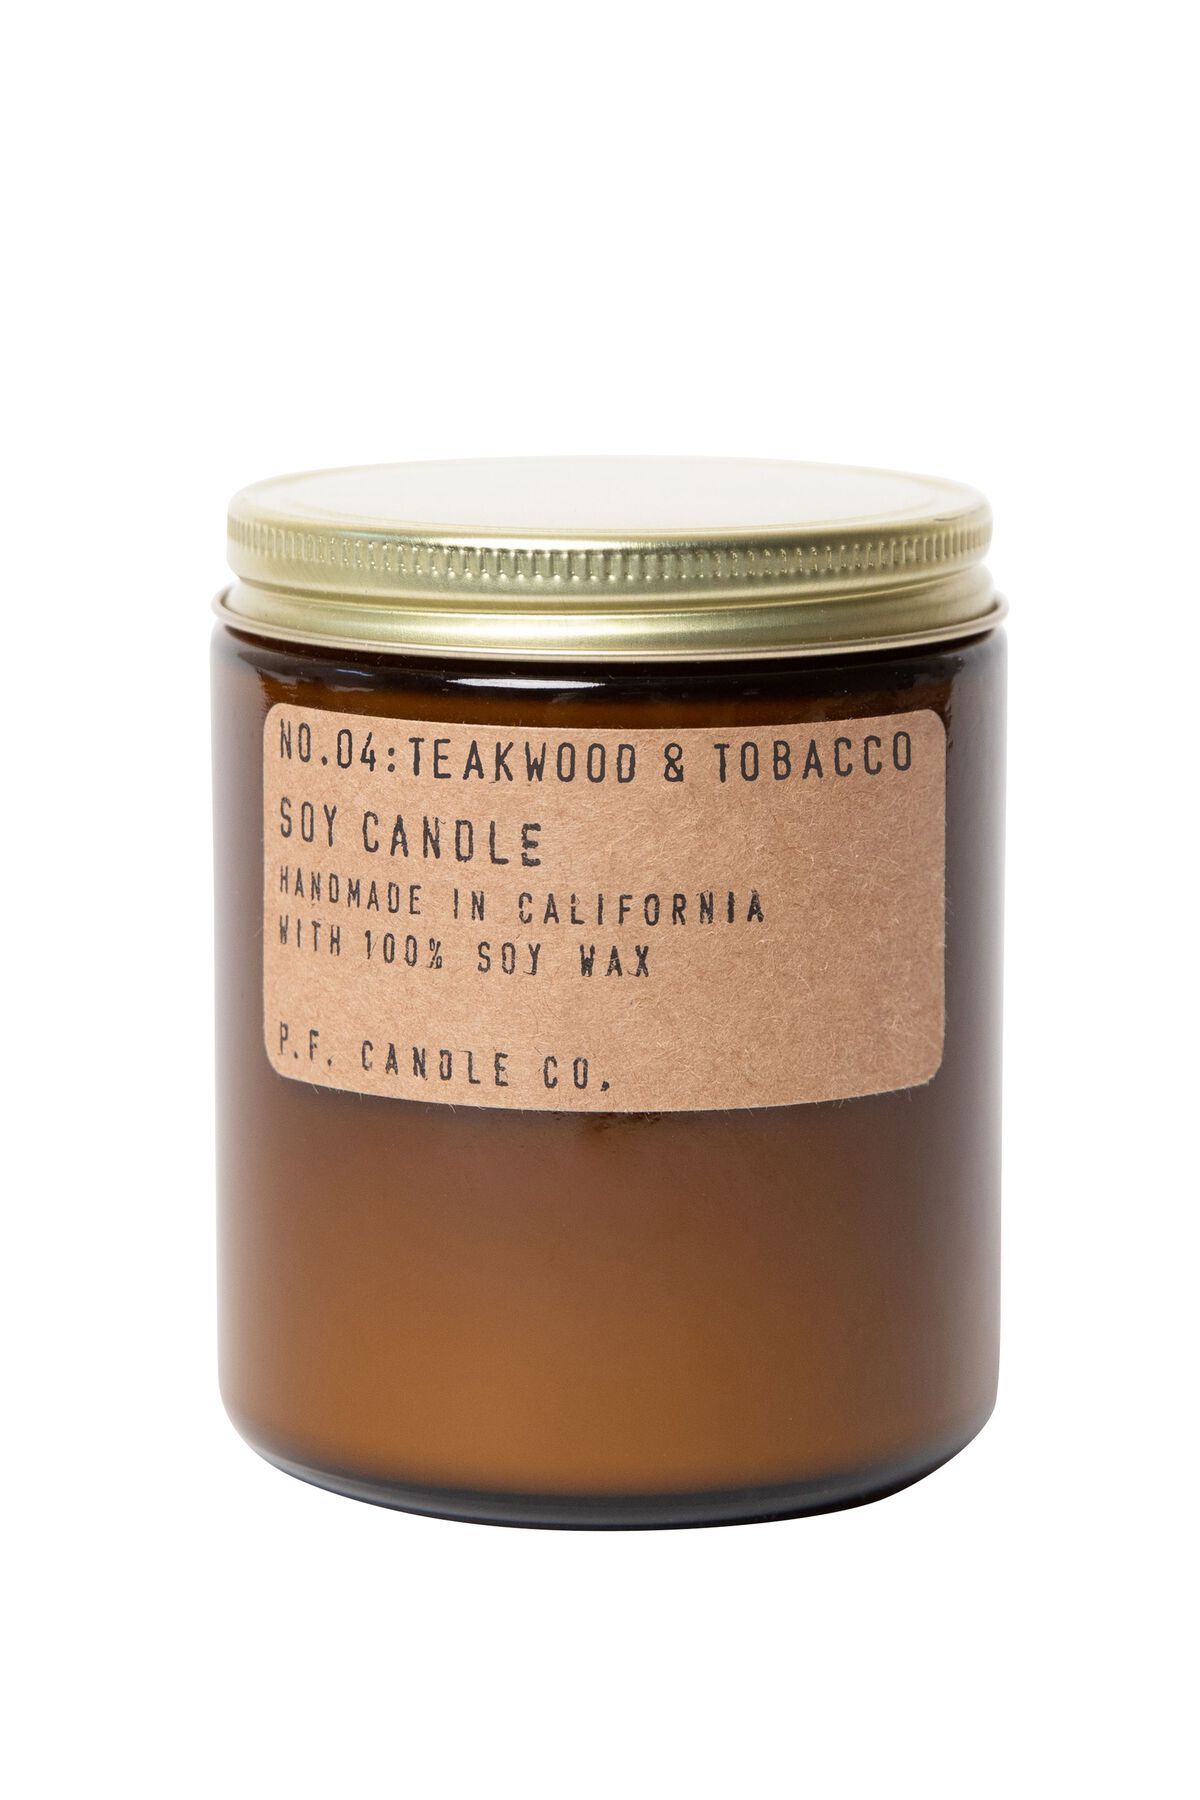 Dynamite P.F. CANDLE CO | Soy Candle. 2